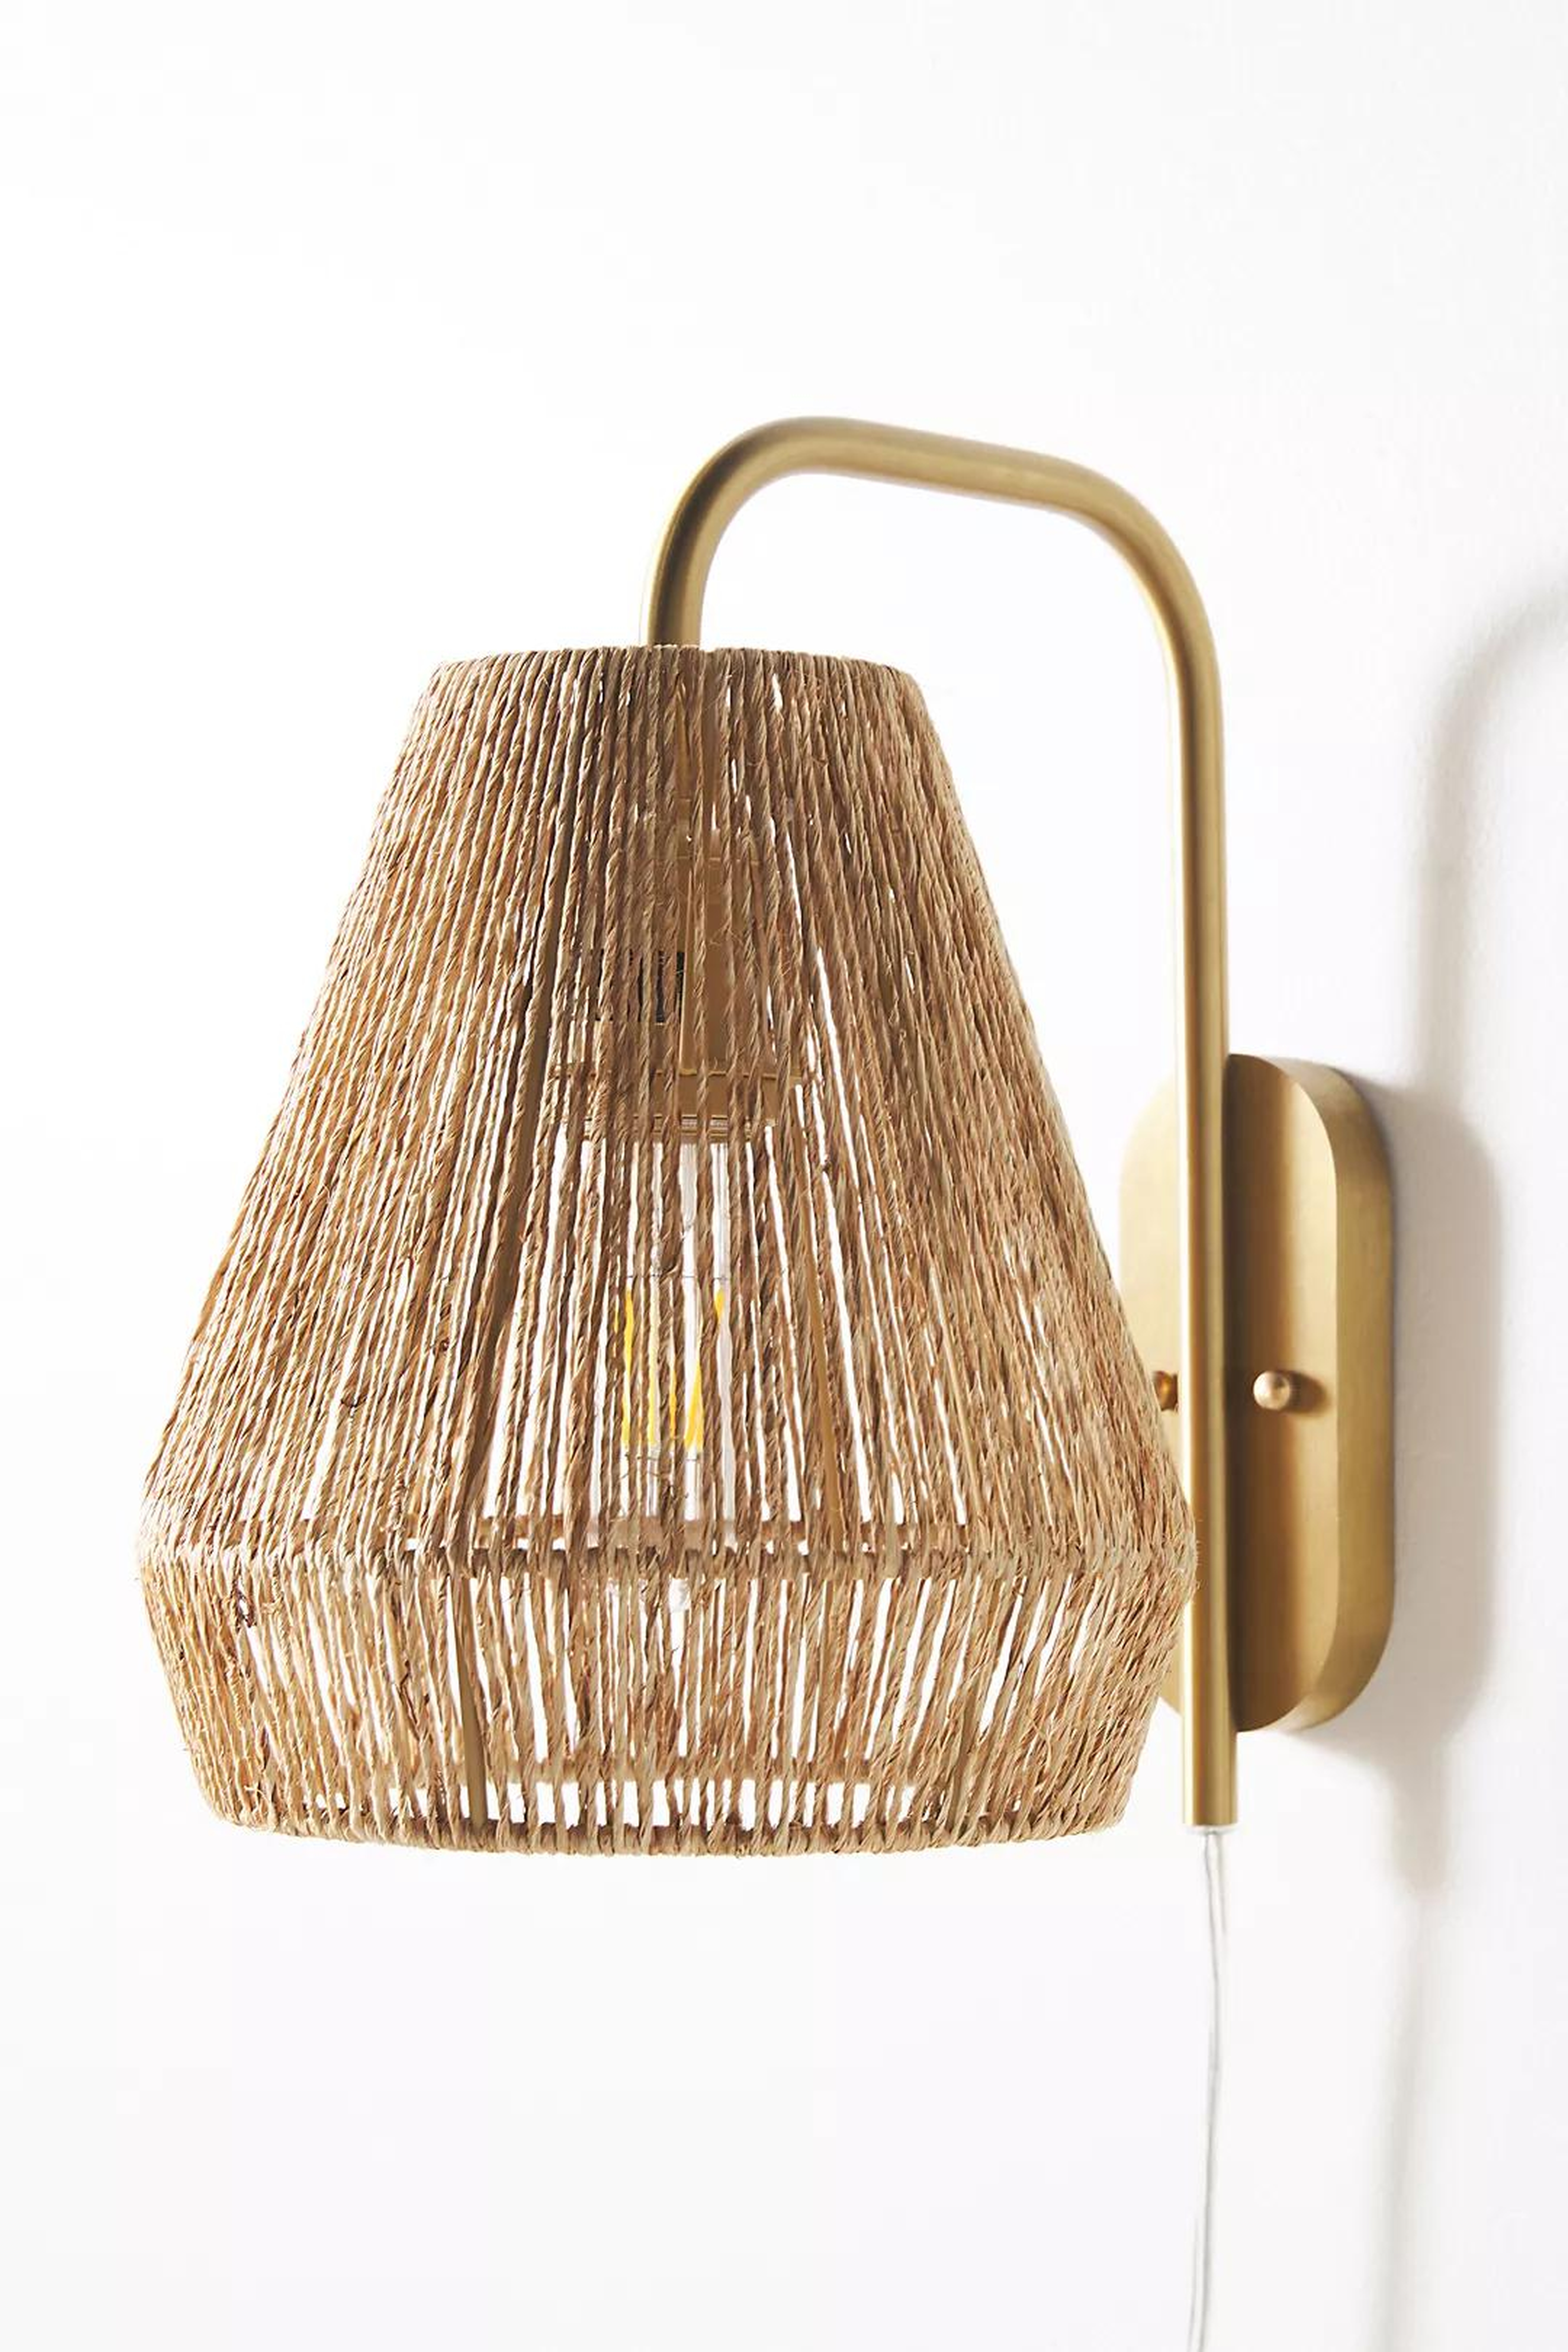 Bungalow Sconce, Natural RESTOCK Feb 13, 2023 - Anthropologie